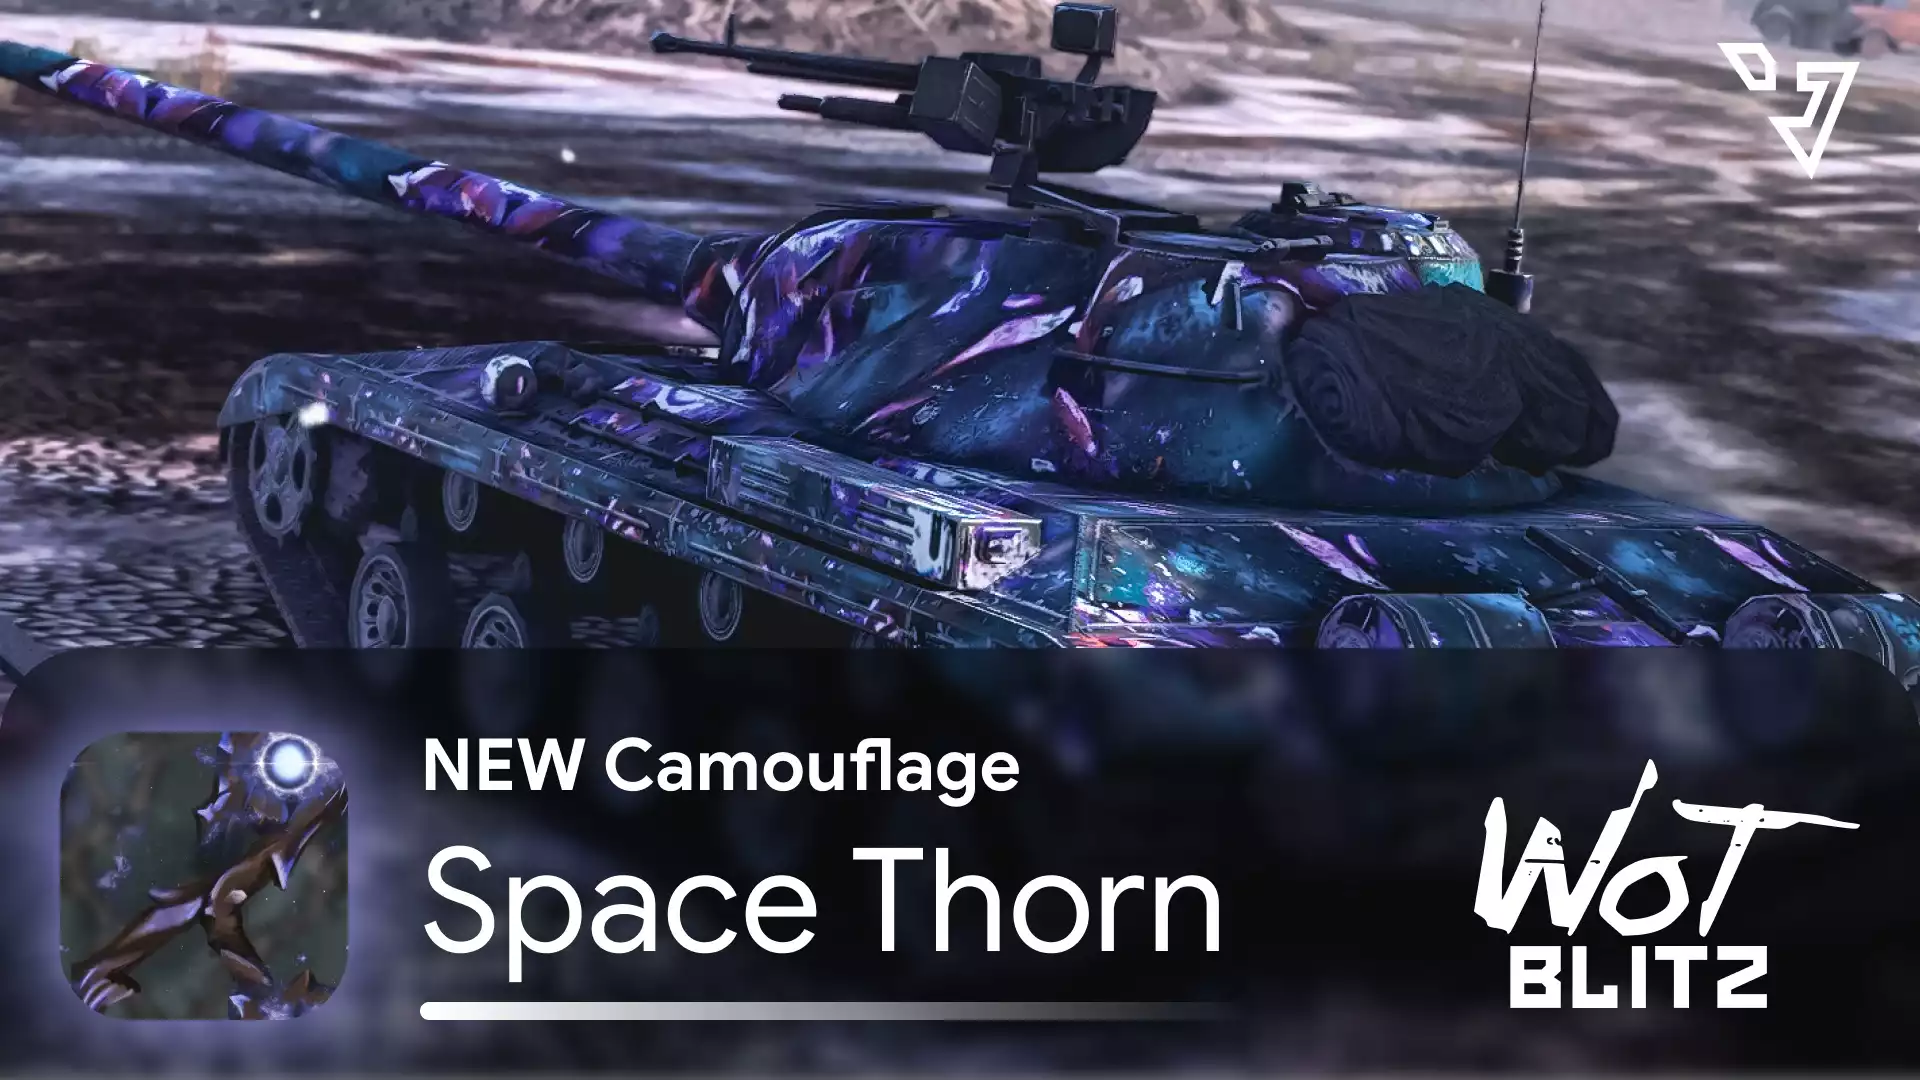 Camouflage “Space Thorn”